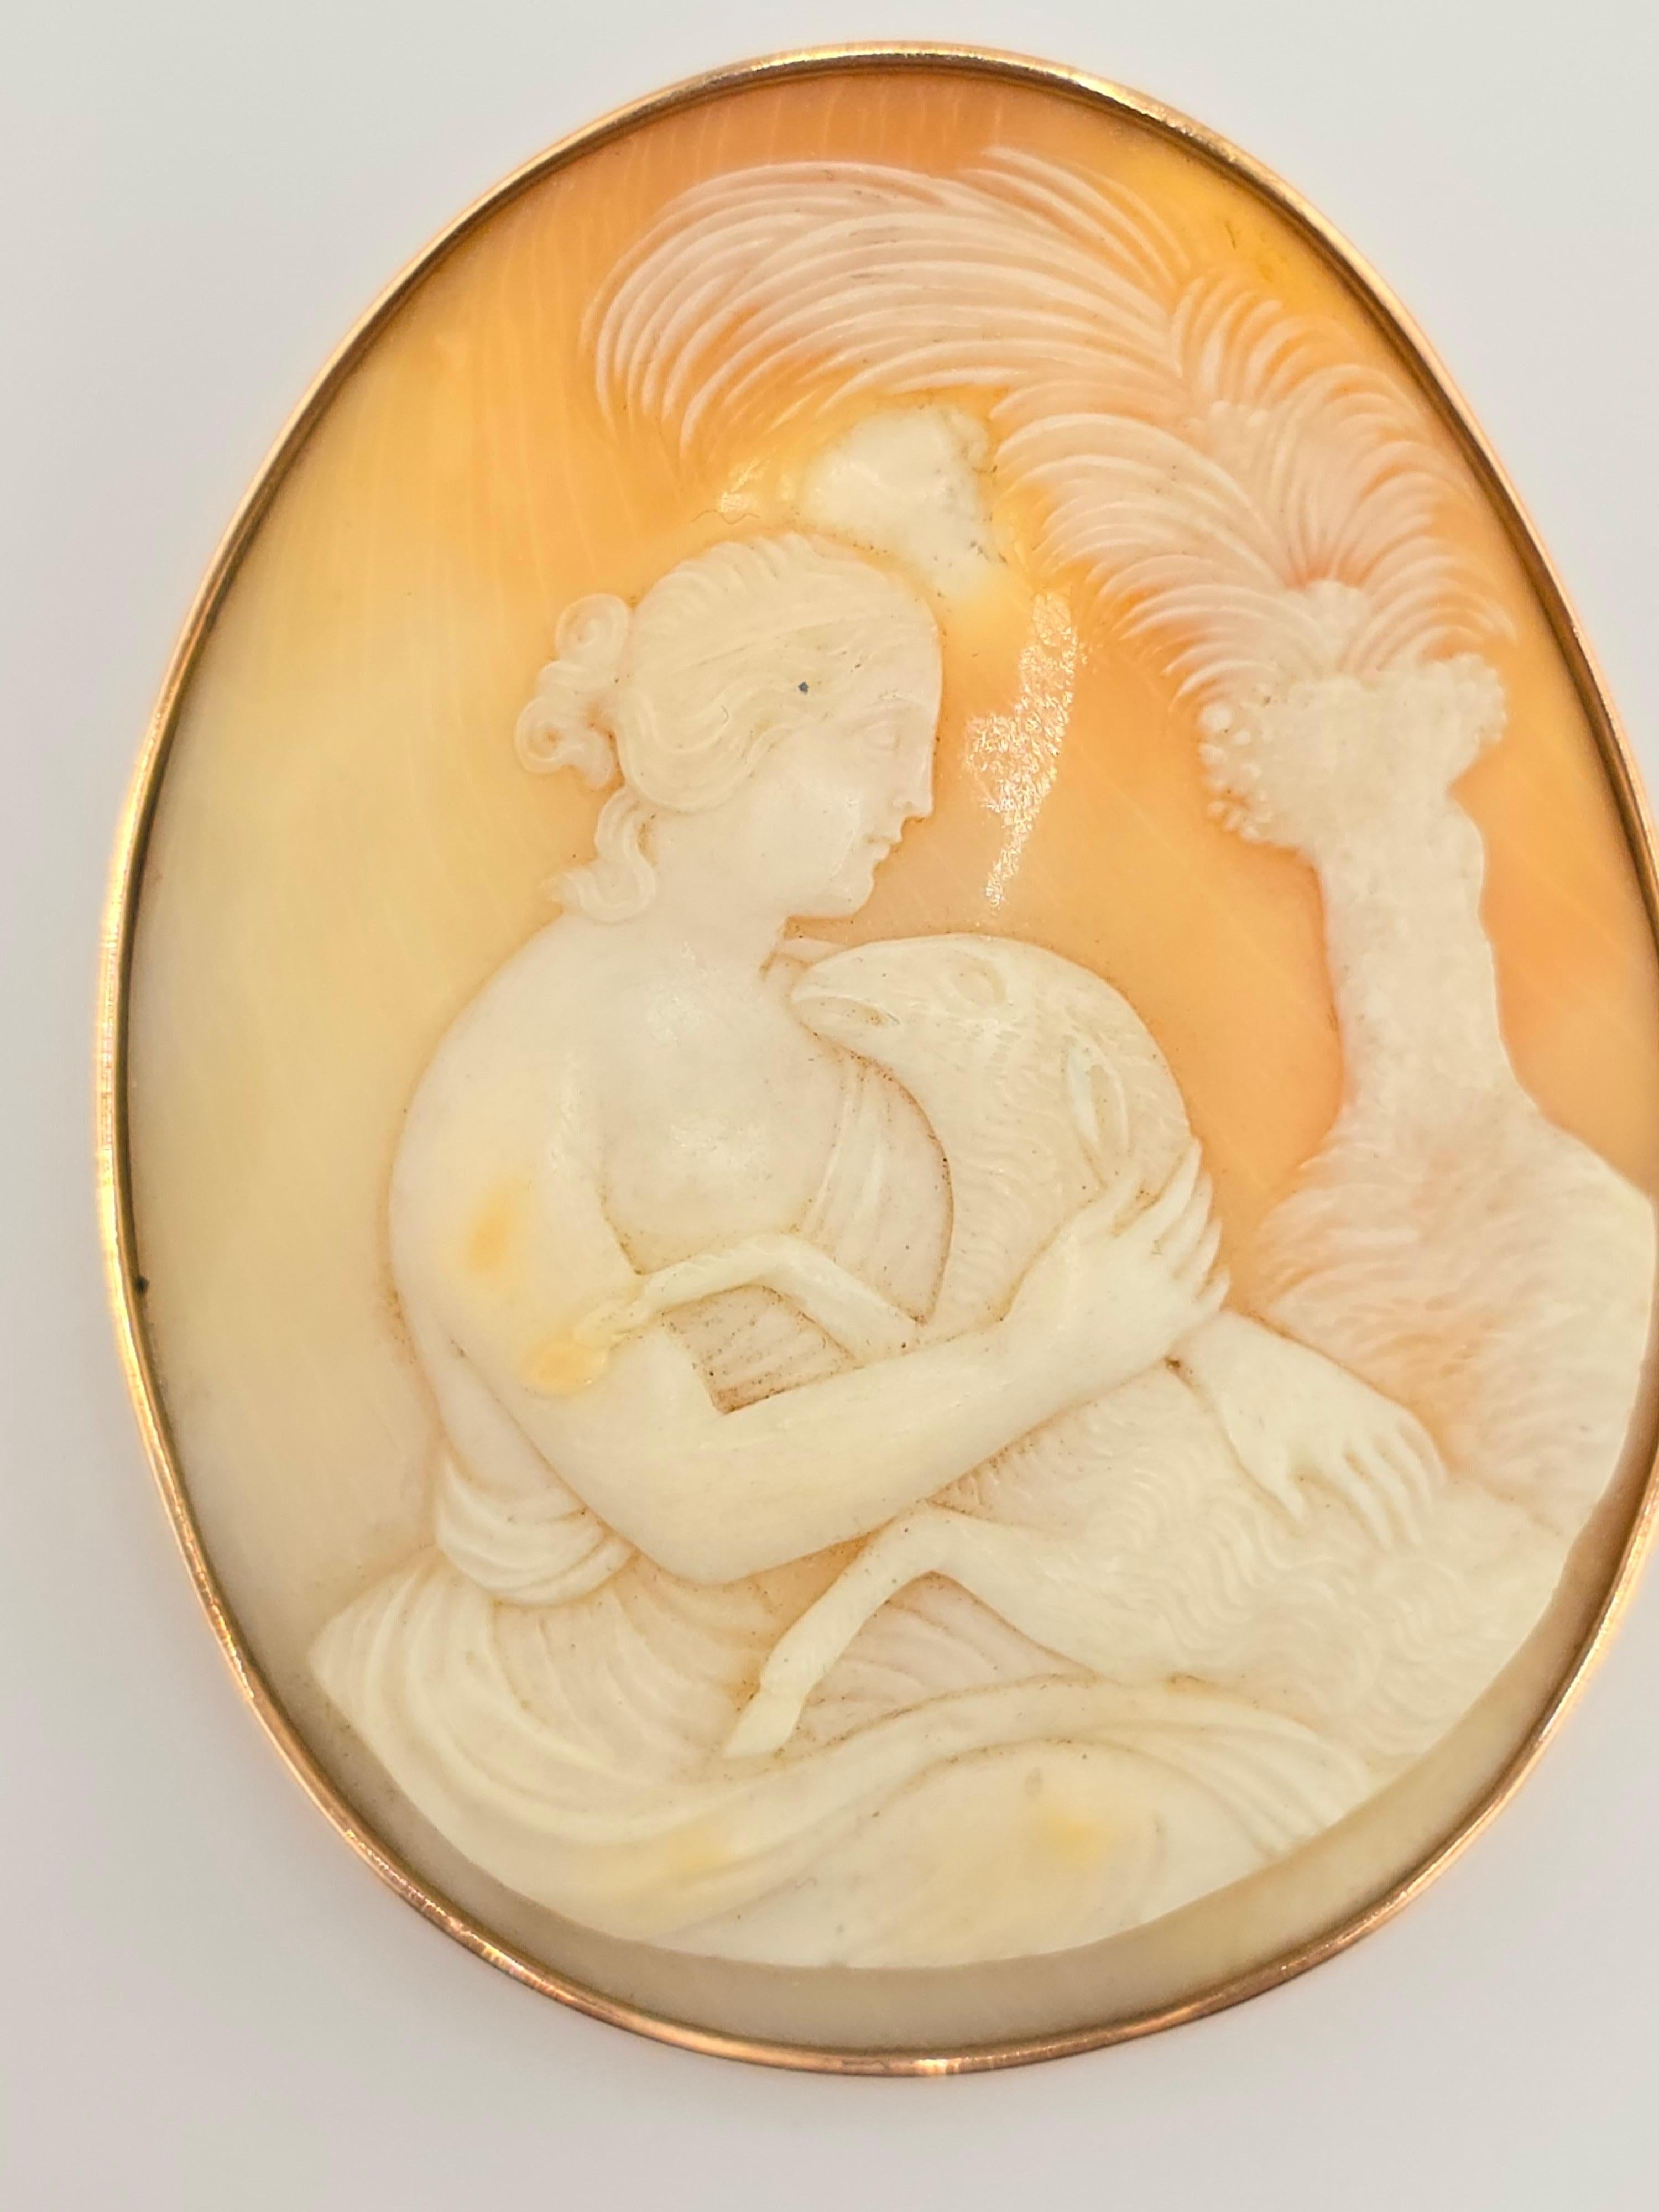 This is a very unique antique 14K gold cameo brooch, it has a lovely scenery of a young lady and a sheep or lamb. The carving on the cameo is superb, and definitely finer than the usual ones you see. The hands, the face everything is fantastically